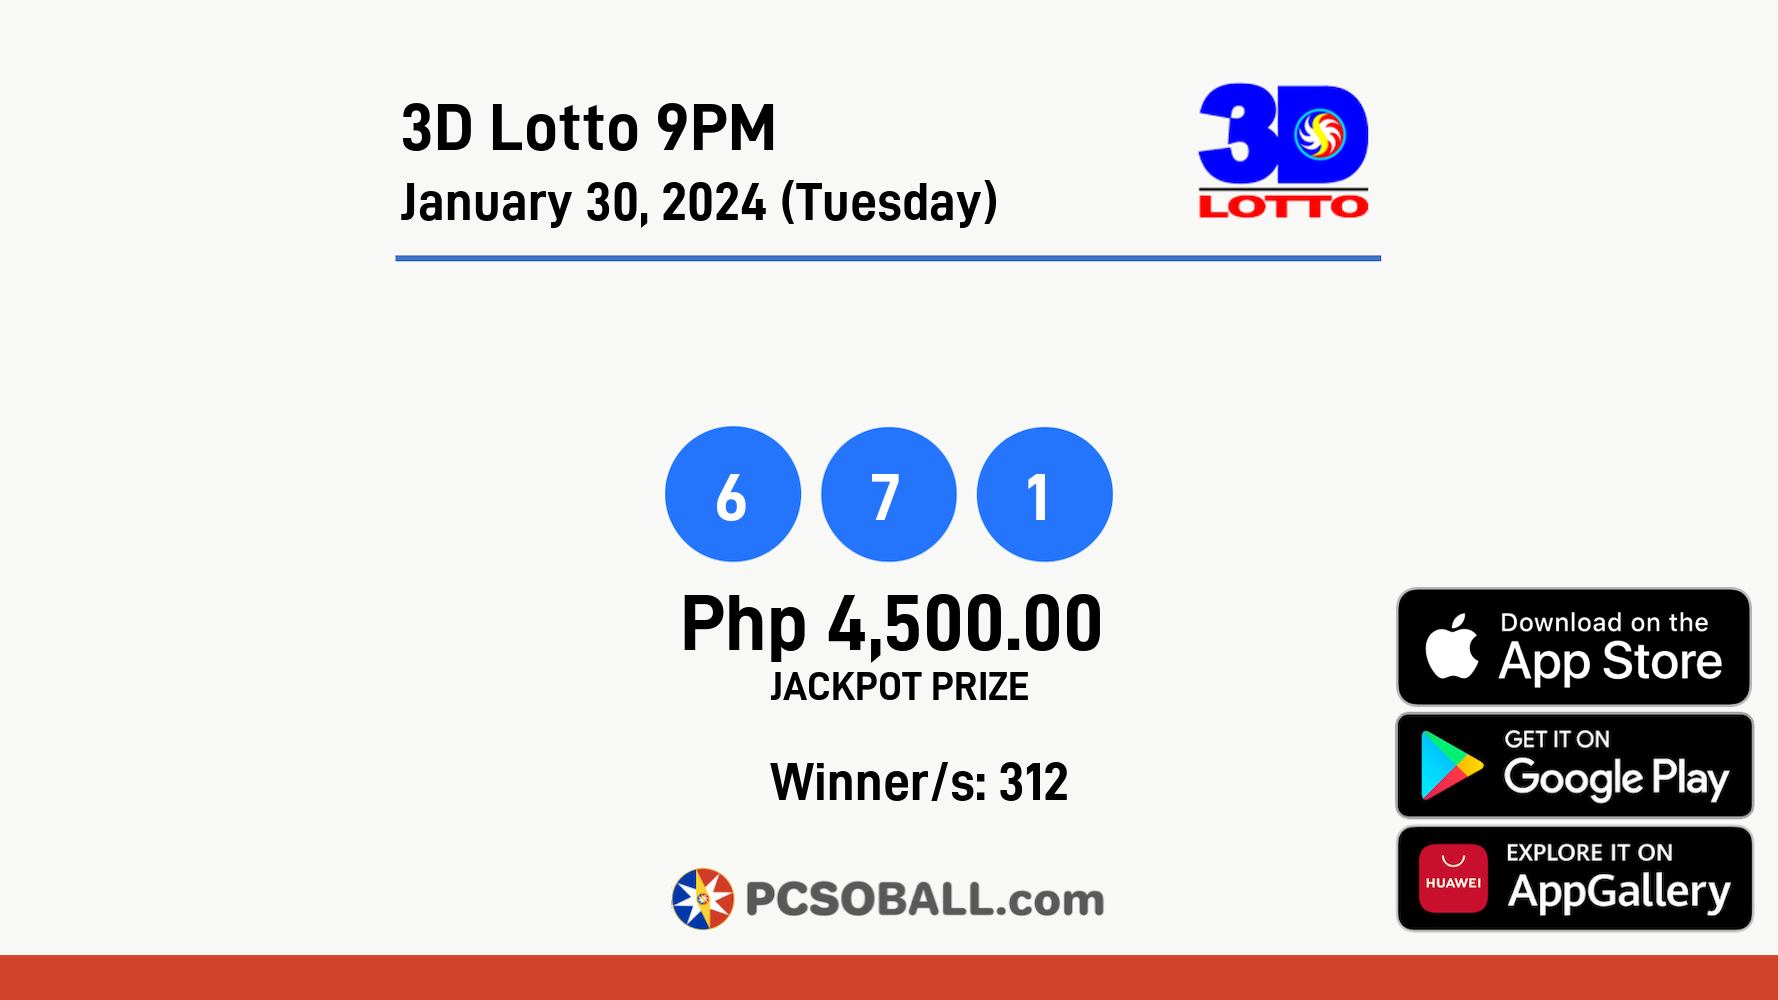 3D Lotto 9PM January 30, 2024 (Tuesday) Result